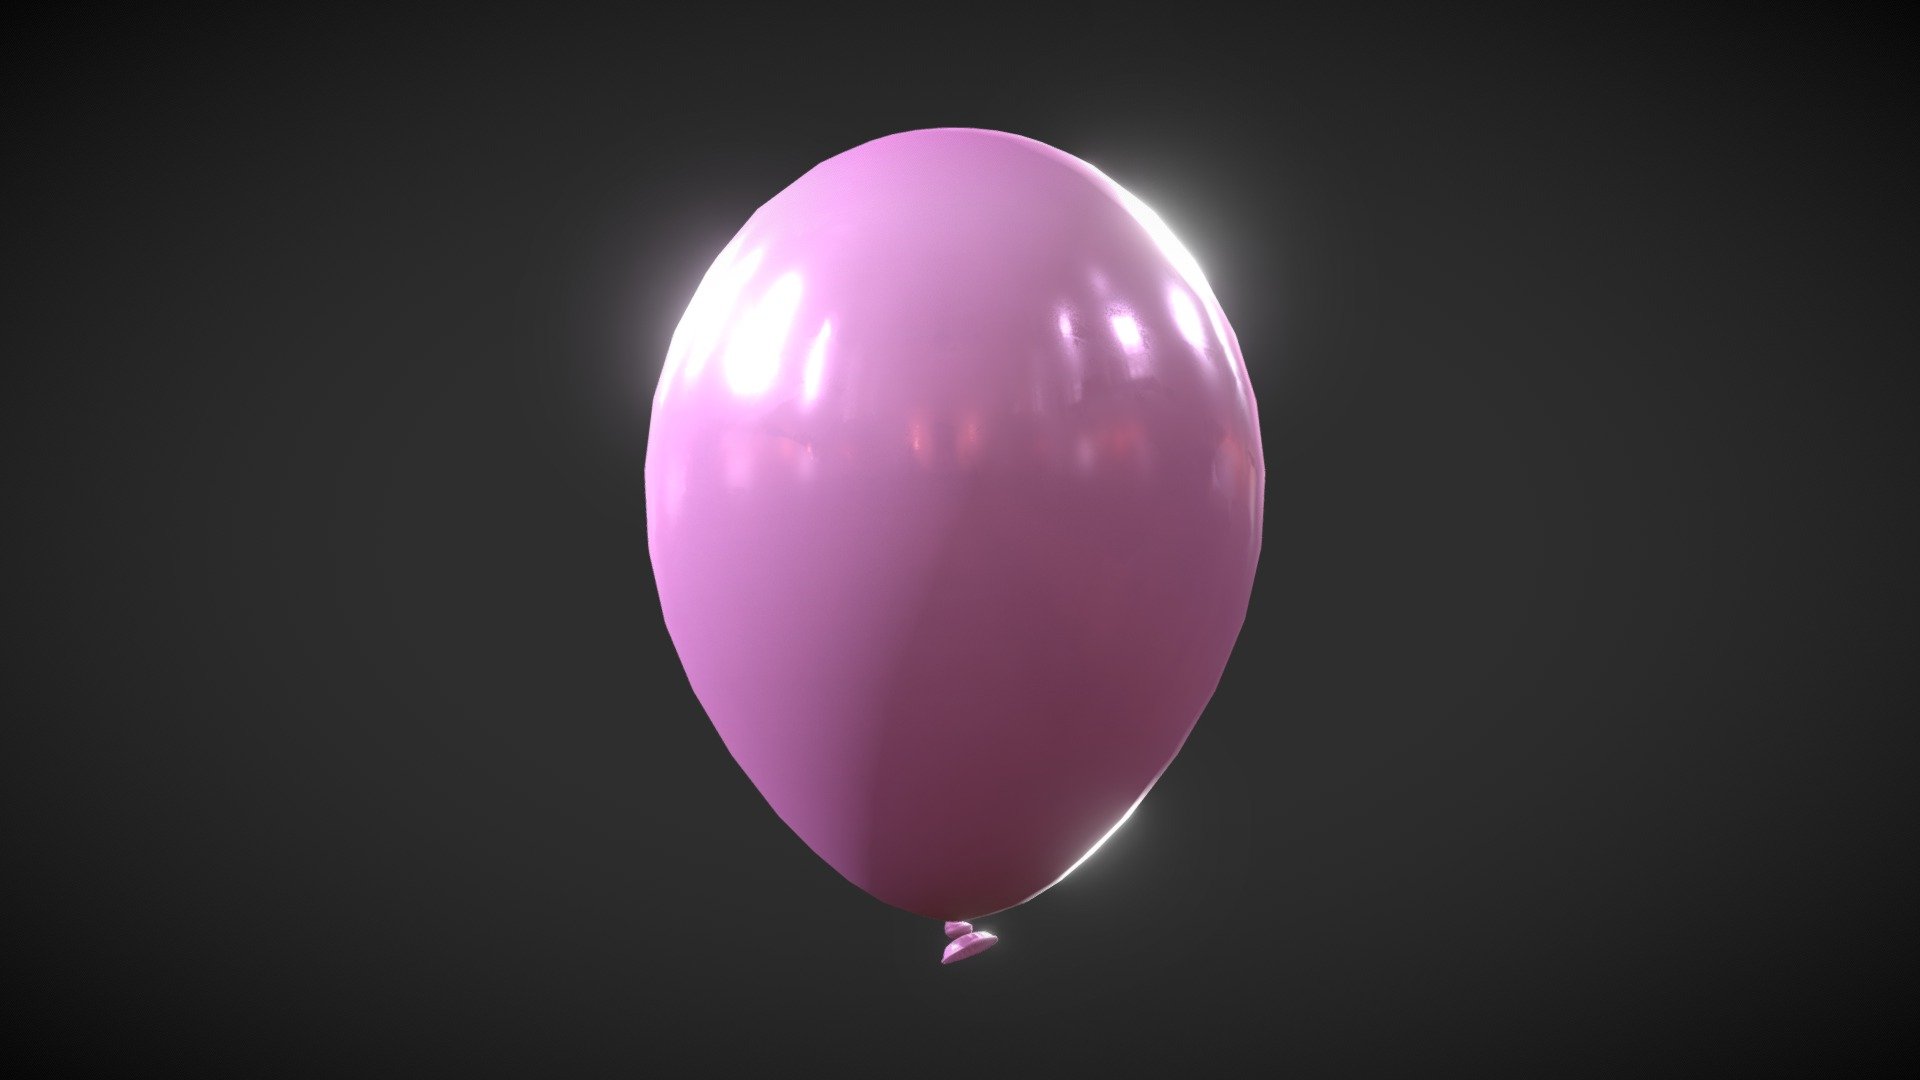 Comes with 12 colour maps and 2 metallic maps to create 24 balloons.
All Textures created in Substance Painter and exported in .PNG PBR roughness/metallic formats.
Logically named objects, materials and textures.
Modelled in Blender 2.91
Textured in Substance Painter 2020.2.1.
Modelled to real world scales.
Fully and efficiently UV unwrapped.
Game ready.
Tested in Marmoset Viewer, Marmoset Toolbag, EEVEE and Cycles.

Formats included

.Blend (Native)
.FBX
.OBJ
.DAE

Objects included

Balloon

Textures included in .png format.
Balloon


Base Colour (Black, Blue, Gold, Green, Orange, PaleBlue, Pink, Purple, Red, Silver, White, Yellow)
Roughness
Metallic ( called NonMetallic for regular balloons and Metallic for metallic balloons)
Normal - (OpenGL)

Poly Counts.

Face count: 1,344
Vert count: 1,314
Triangulated count: 2,624
 - Balloons - Buy Royalty Free 3D model by PBR3D 3d model